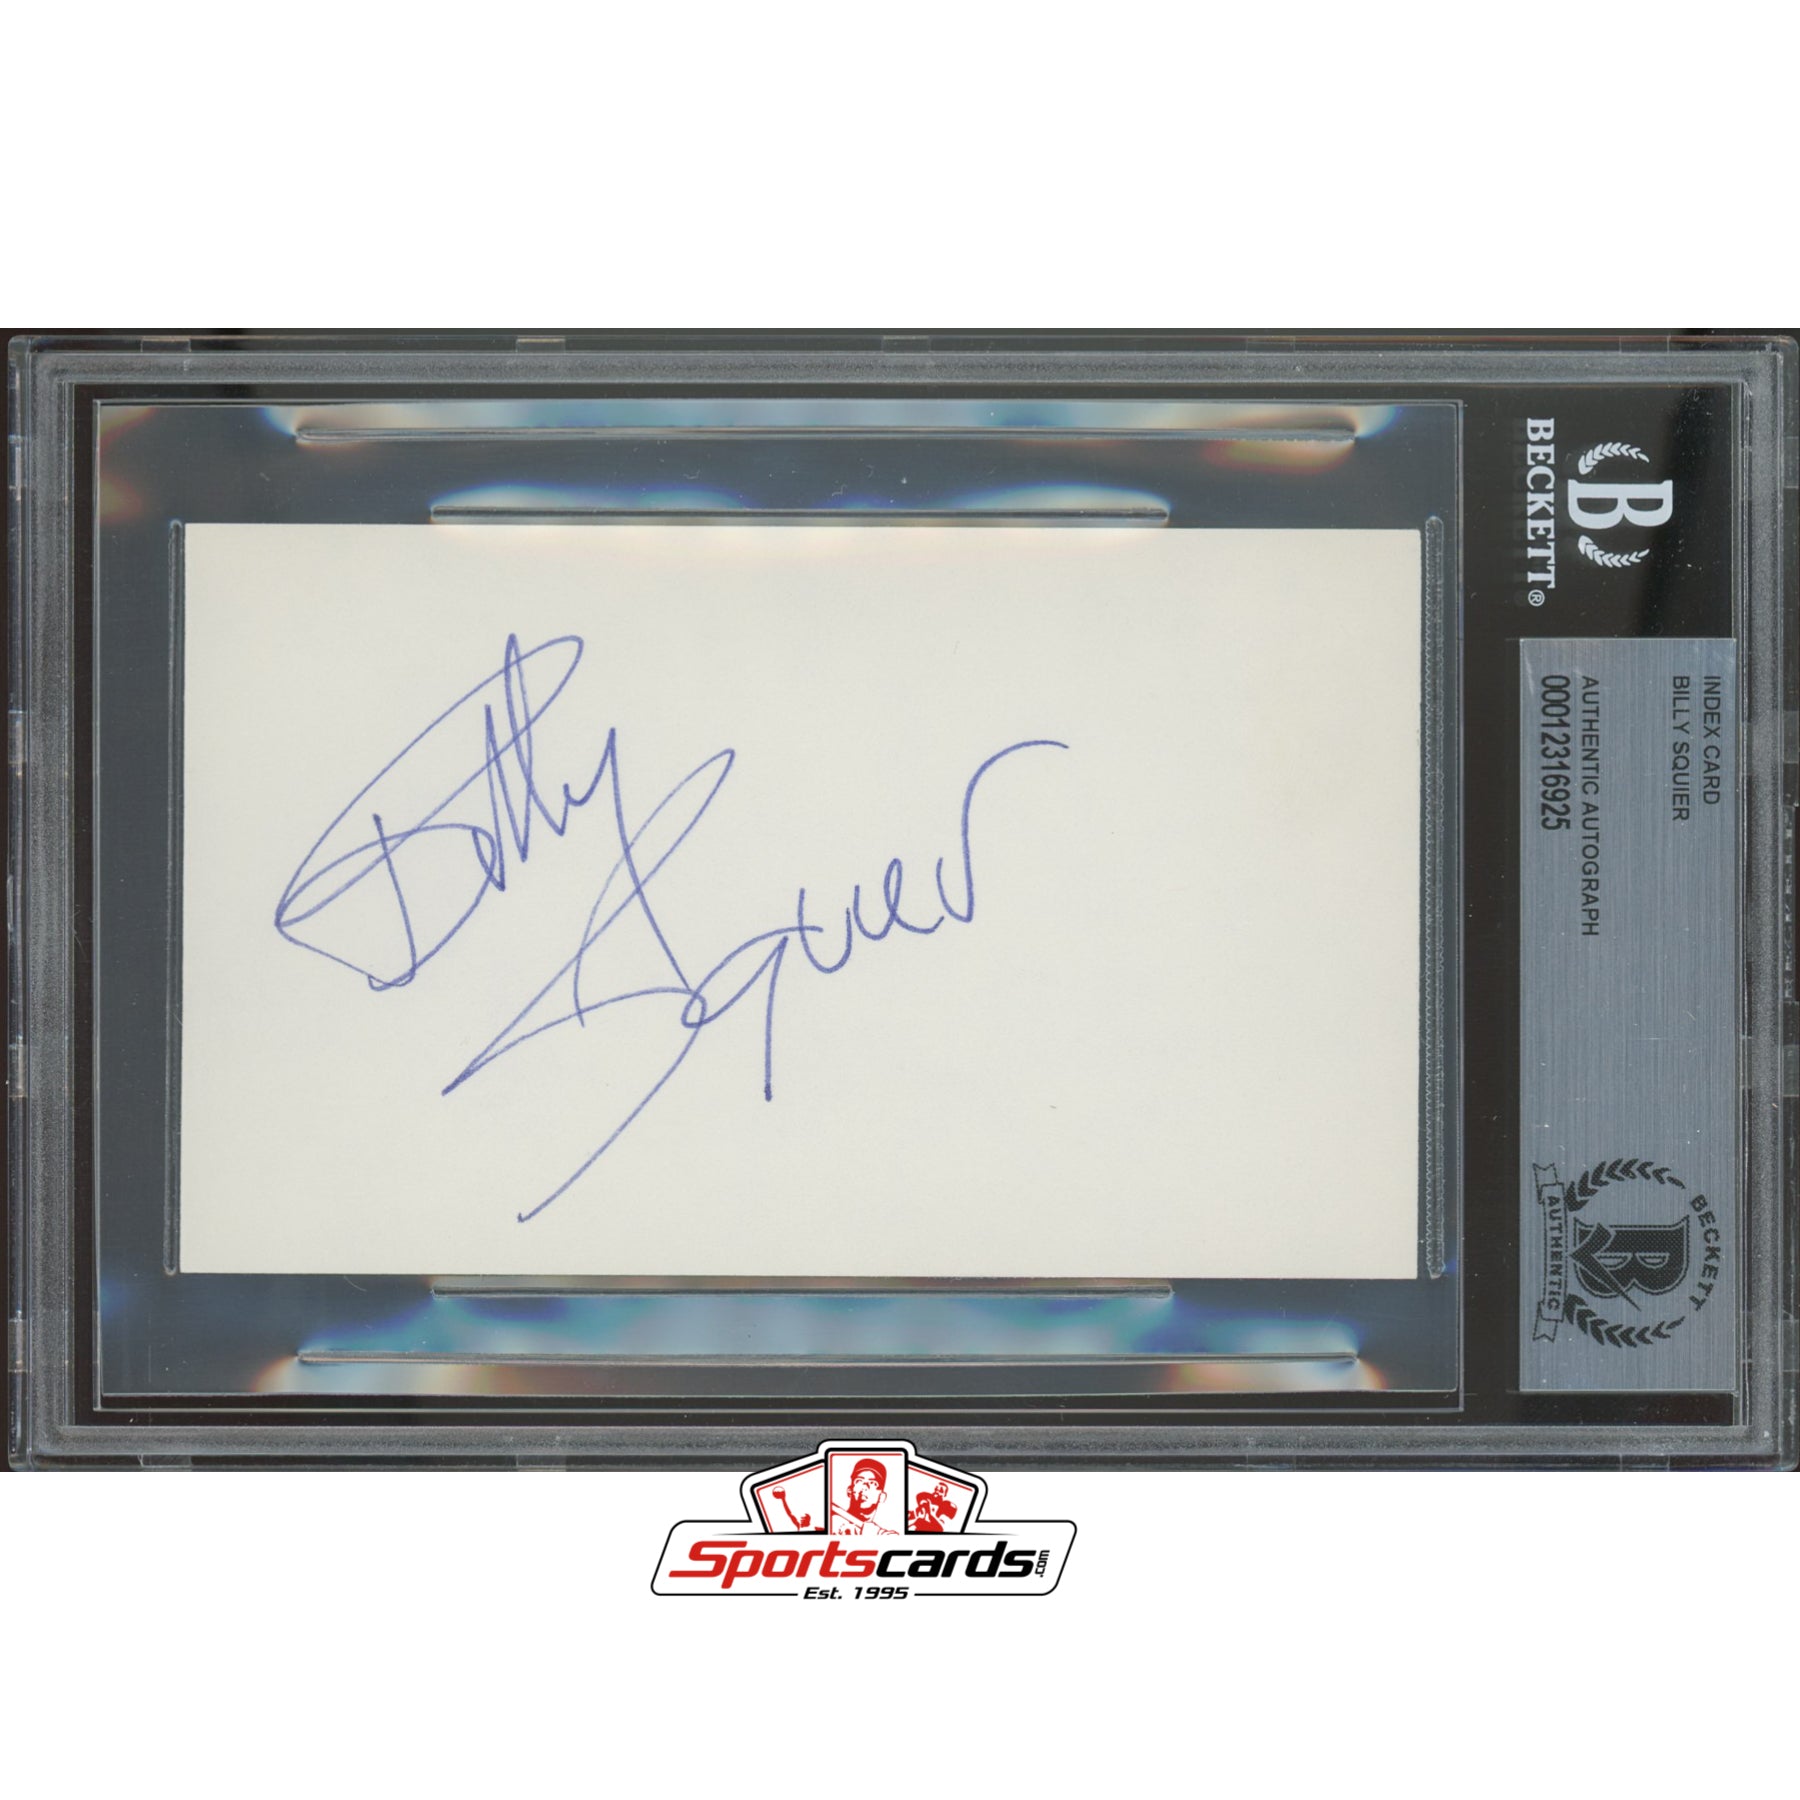 Billy Squier Signed Auto 3x5 Index Card BAS Beckett Encapsulated